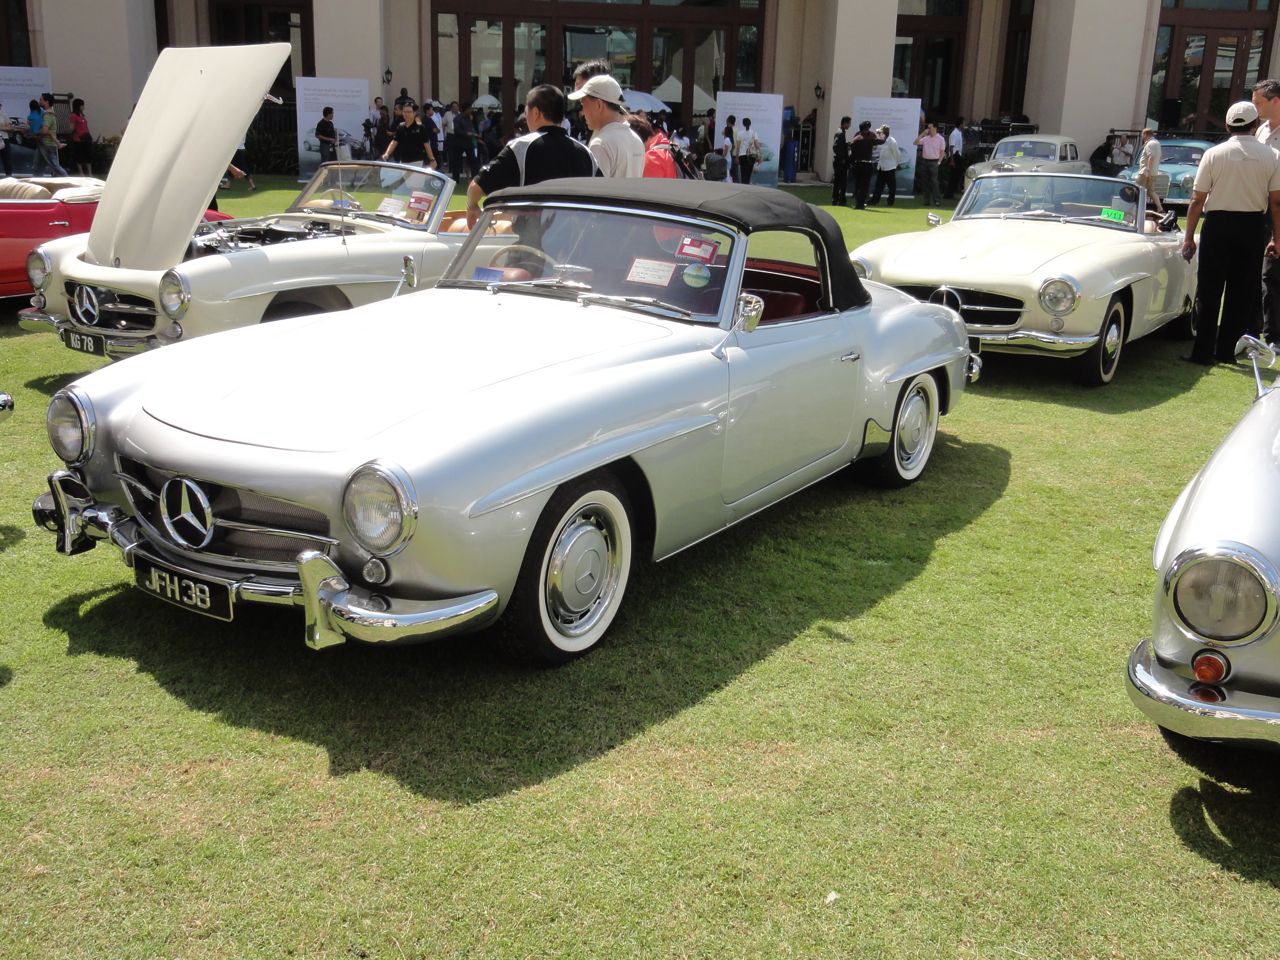 antique mercedess on display in the grass at a classic car show